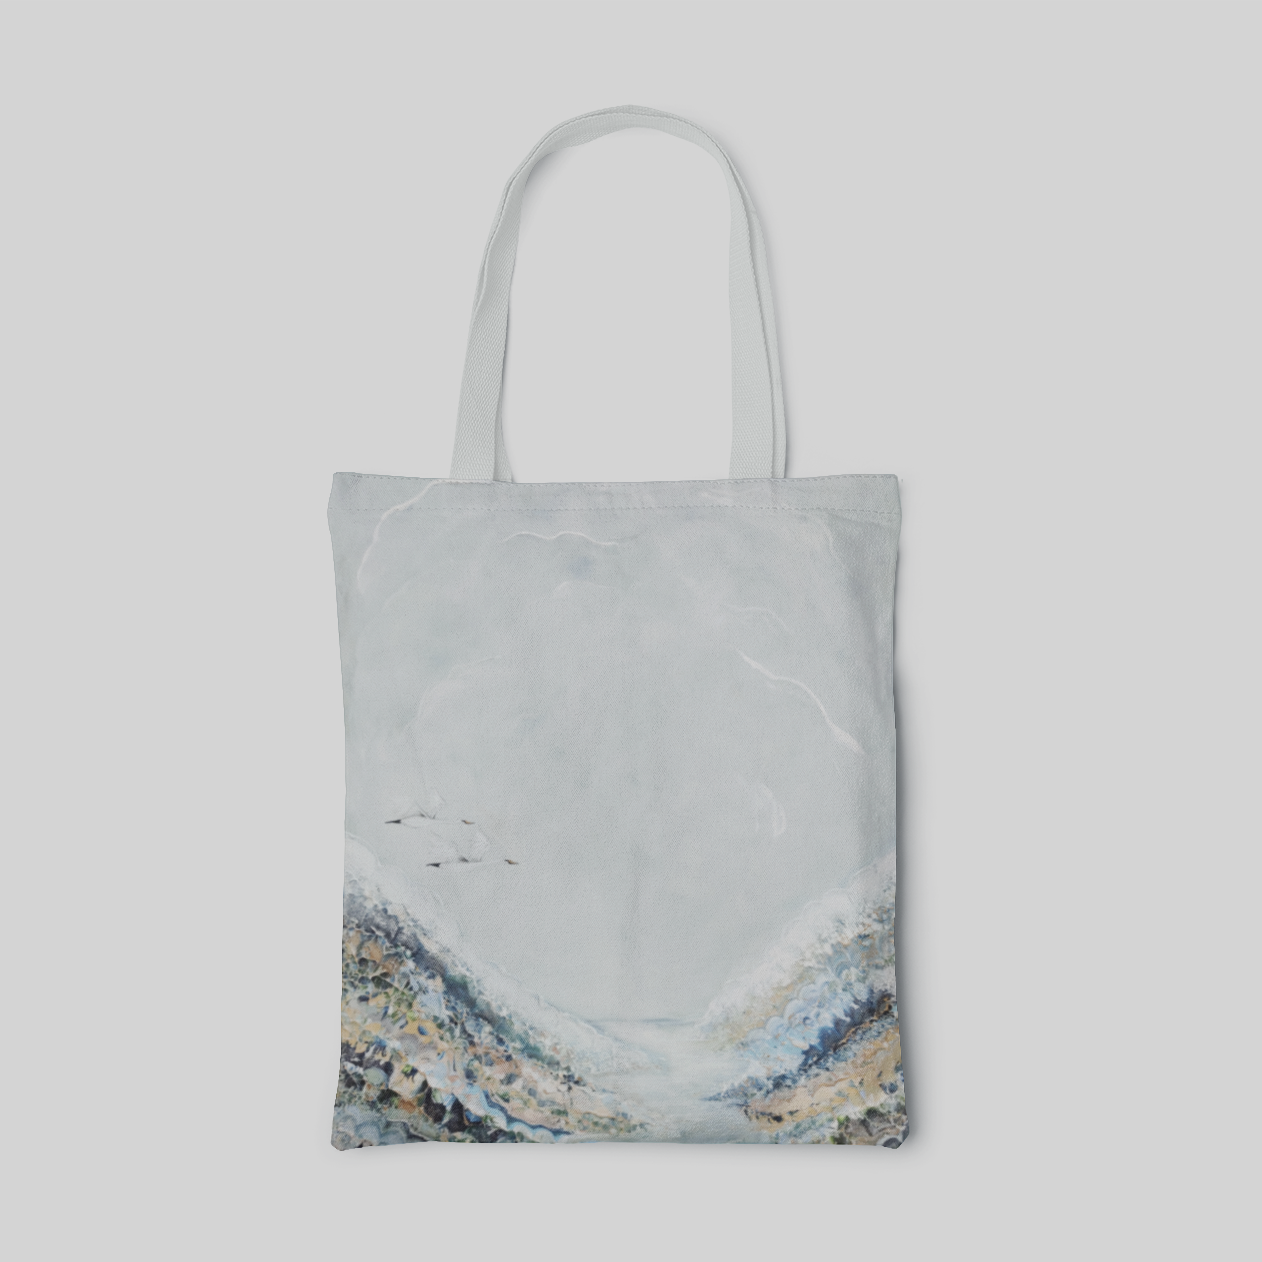 light blue abstract designed tote bag with a pair swans flying in the sky, front side